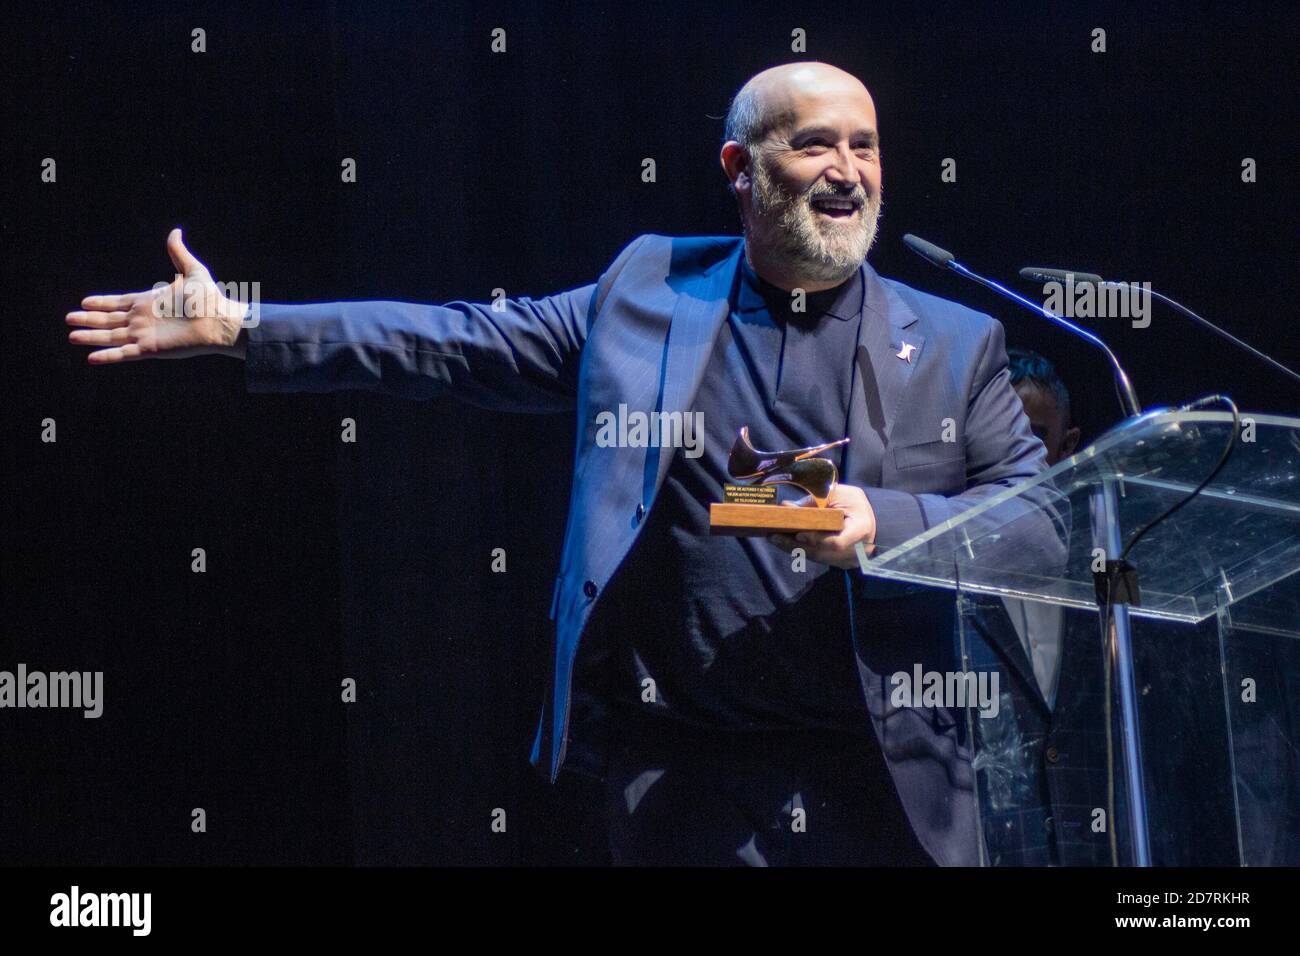 Javier Camara receives his award from 'Union de Actores' Awards 2020 at Teatro Circo Price in Madrid, Spain.March 09, 2020. (Oscar Gil / Alfa Images) Stock Photo